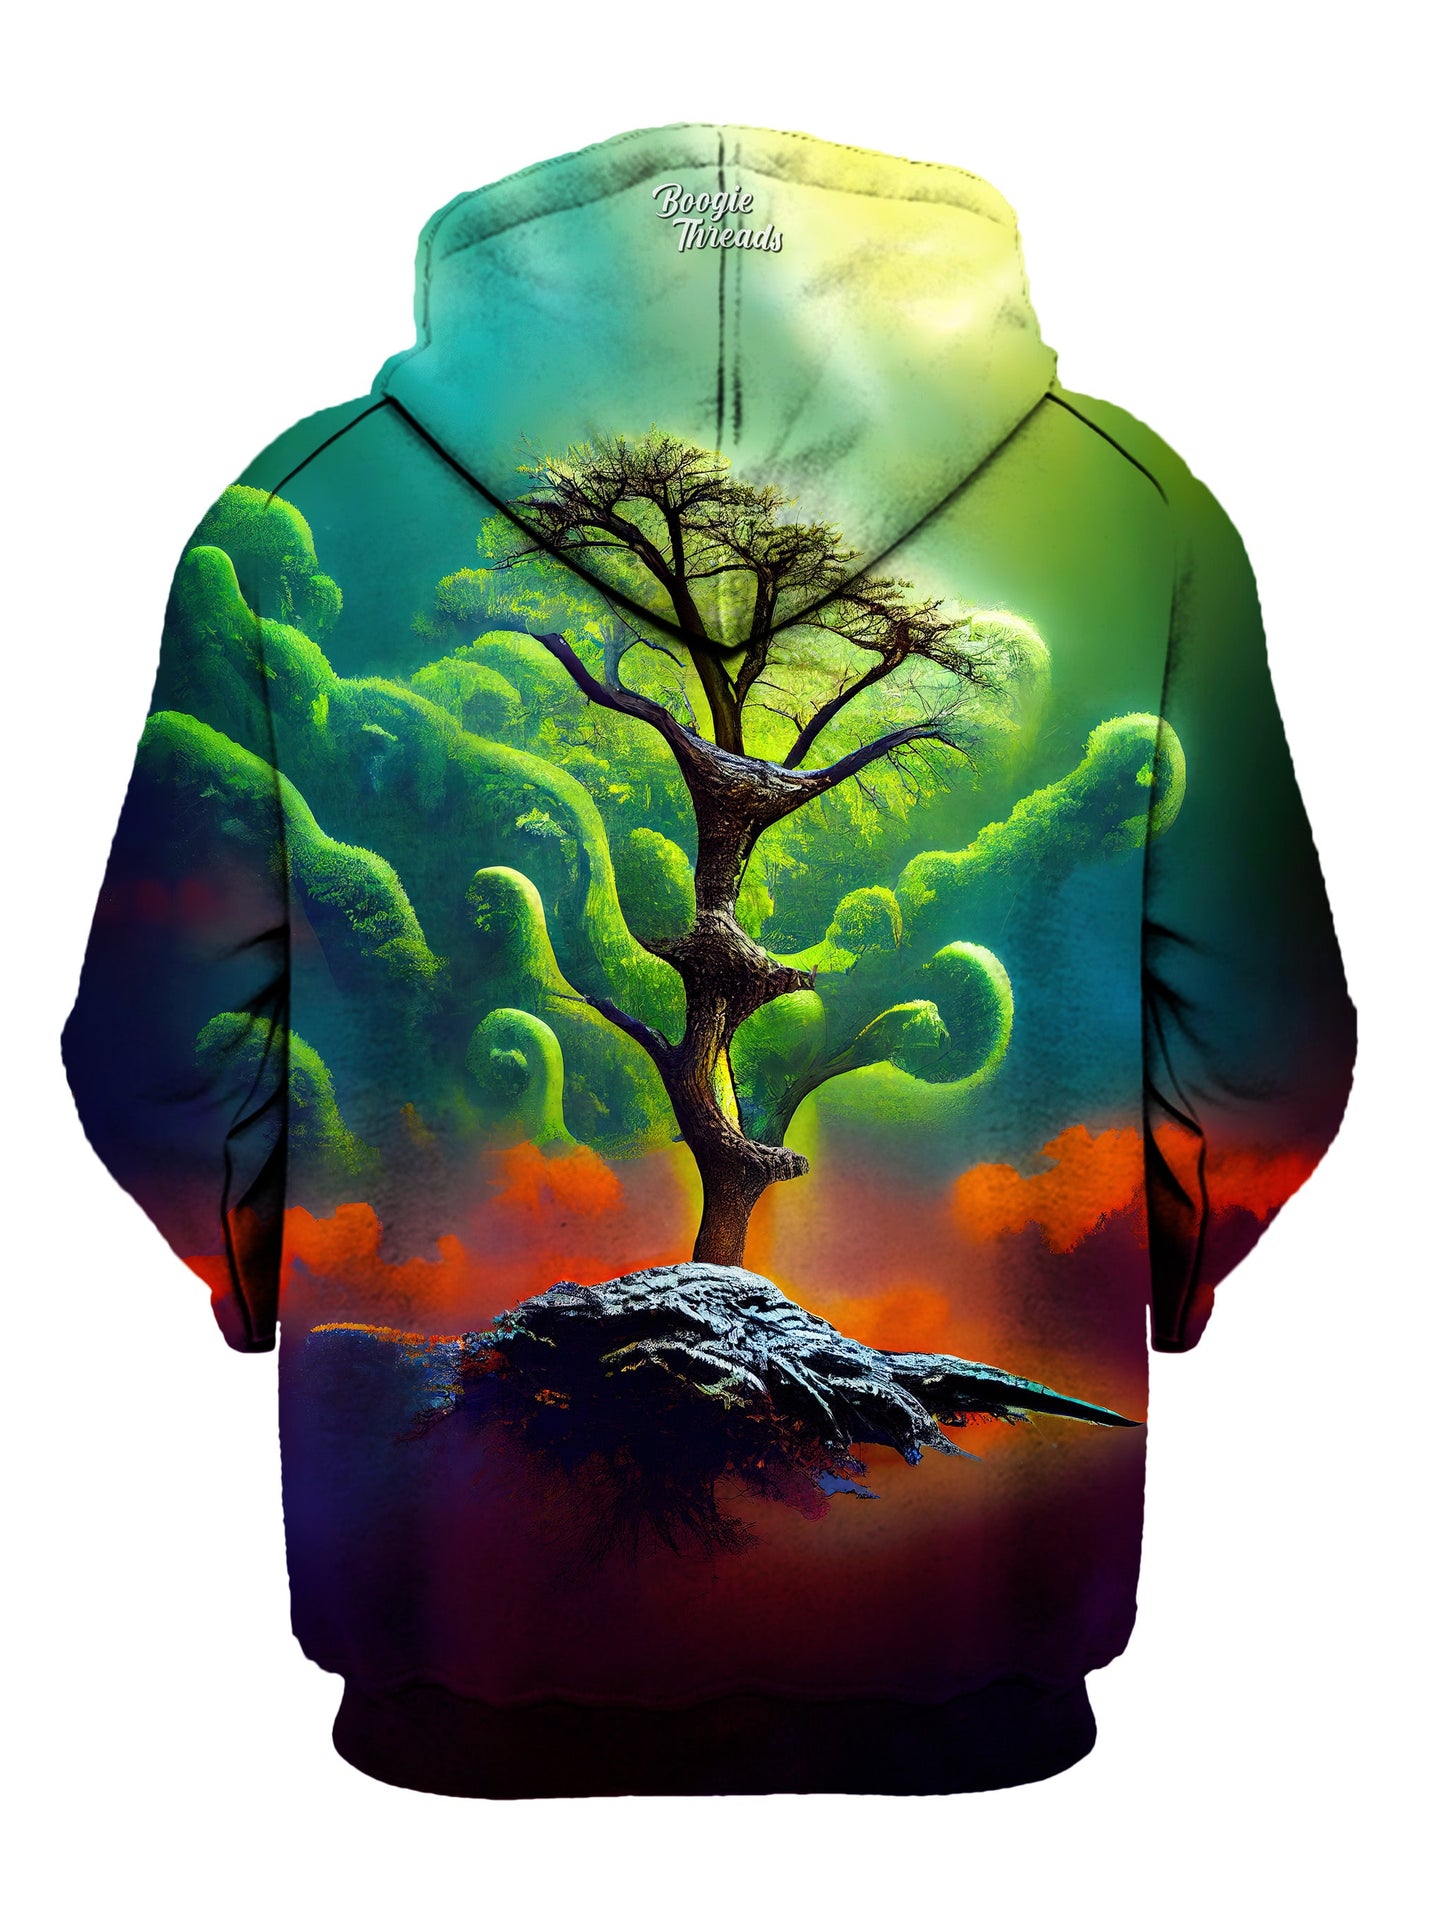 Internal Release Unisex Pullover Hoodie - EDM Festival Clothing - Boogie Threads